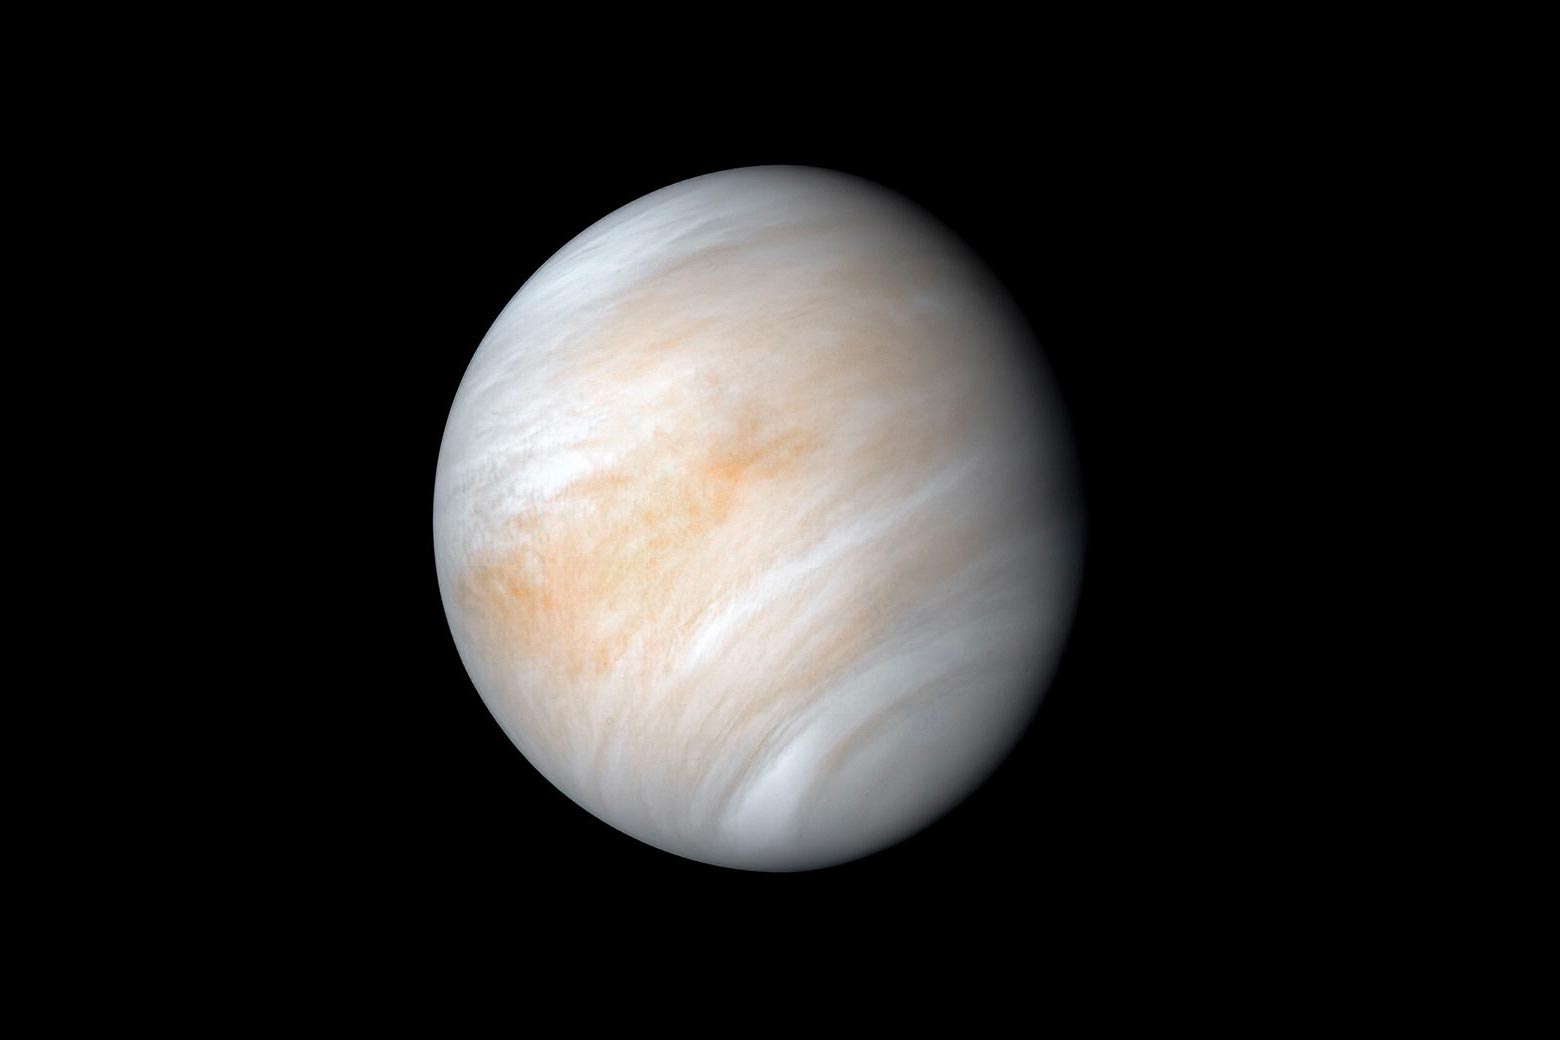 The planet Venus appears cloudy and tan on a black background